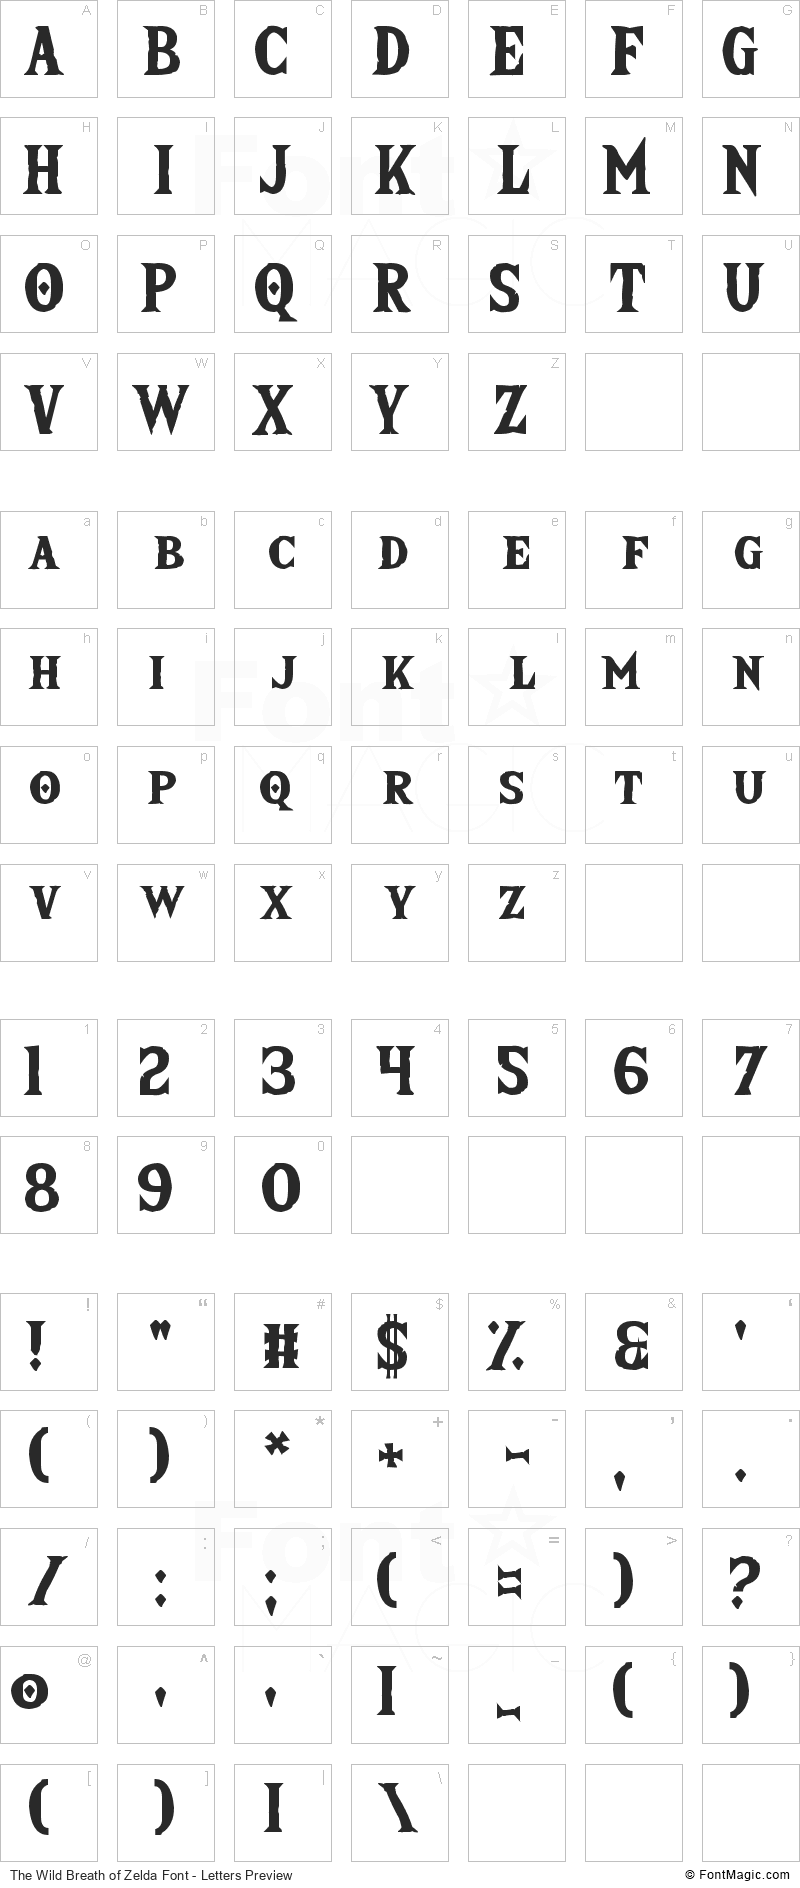 The Wild Breath of Zelda Font - All Latters Preview Chart